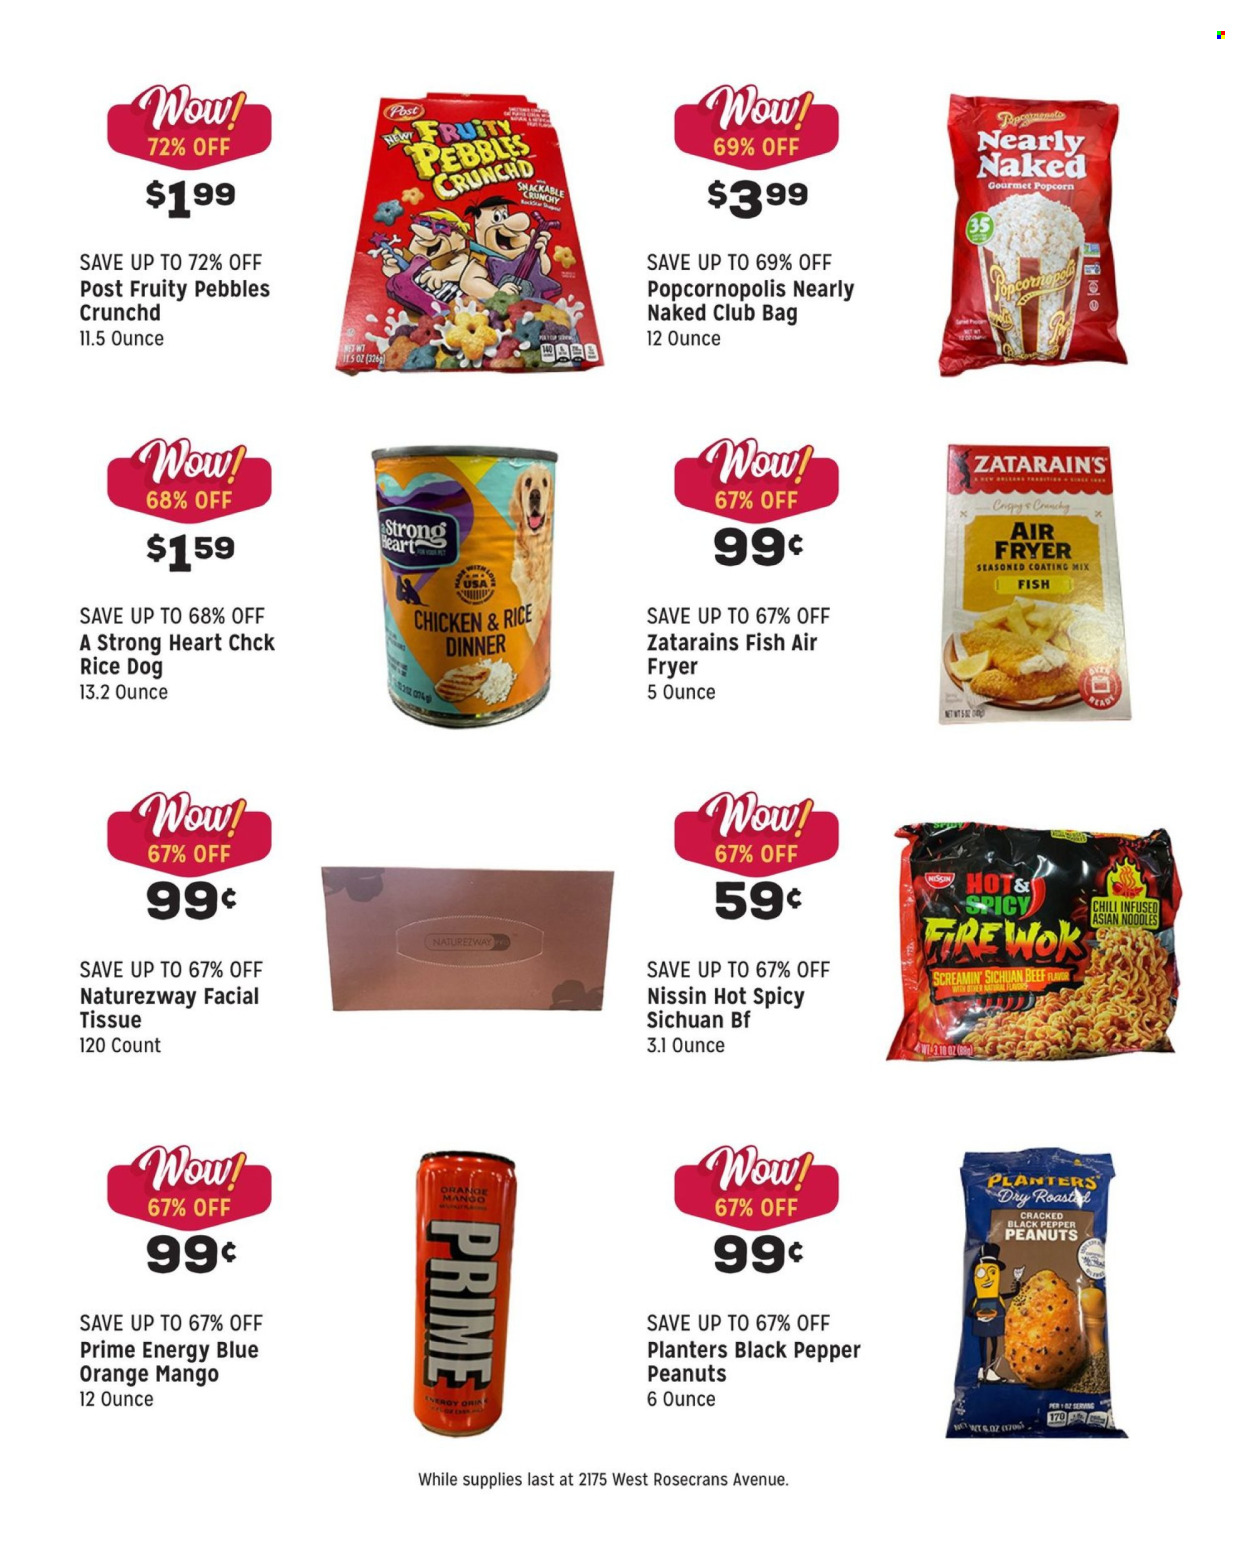 Grocery Outlet ad  - 04.24.2024 - 04.30.2024.